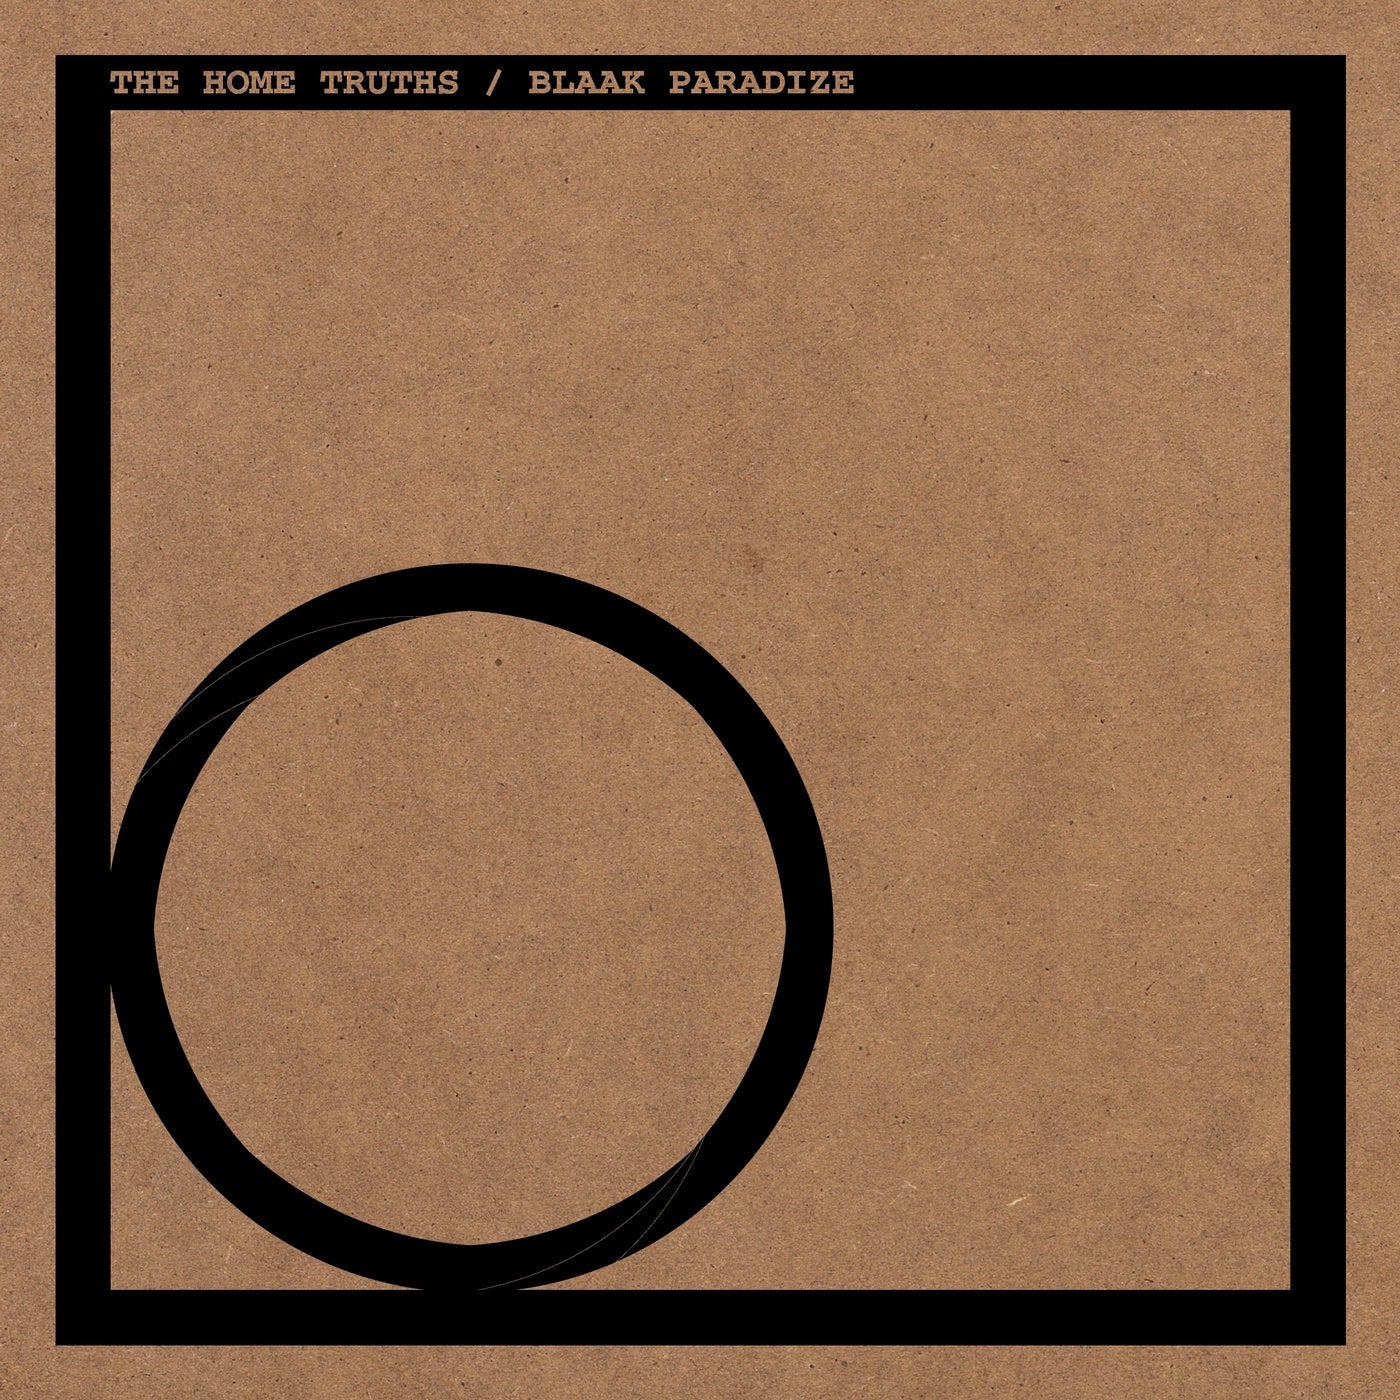 The Home Truths / Blaak Paradize